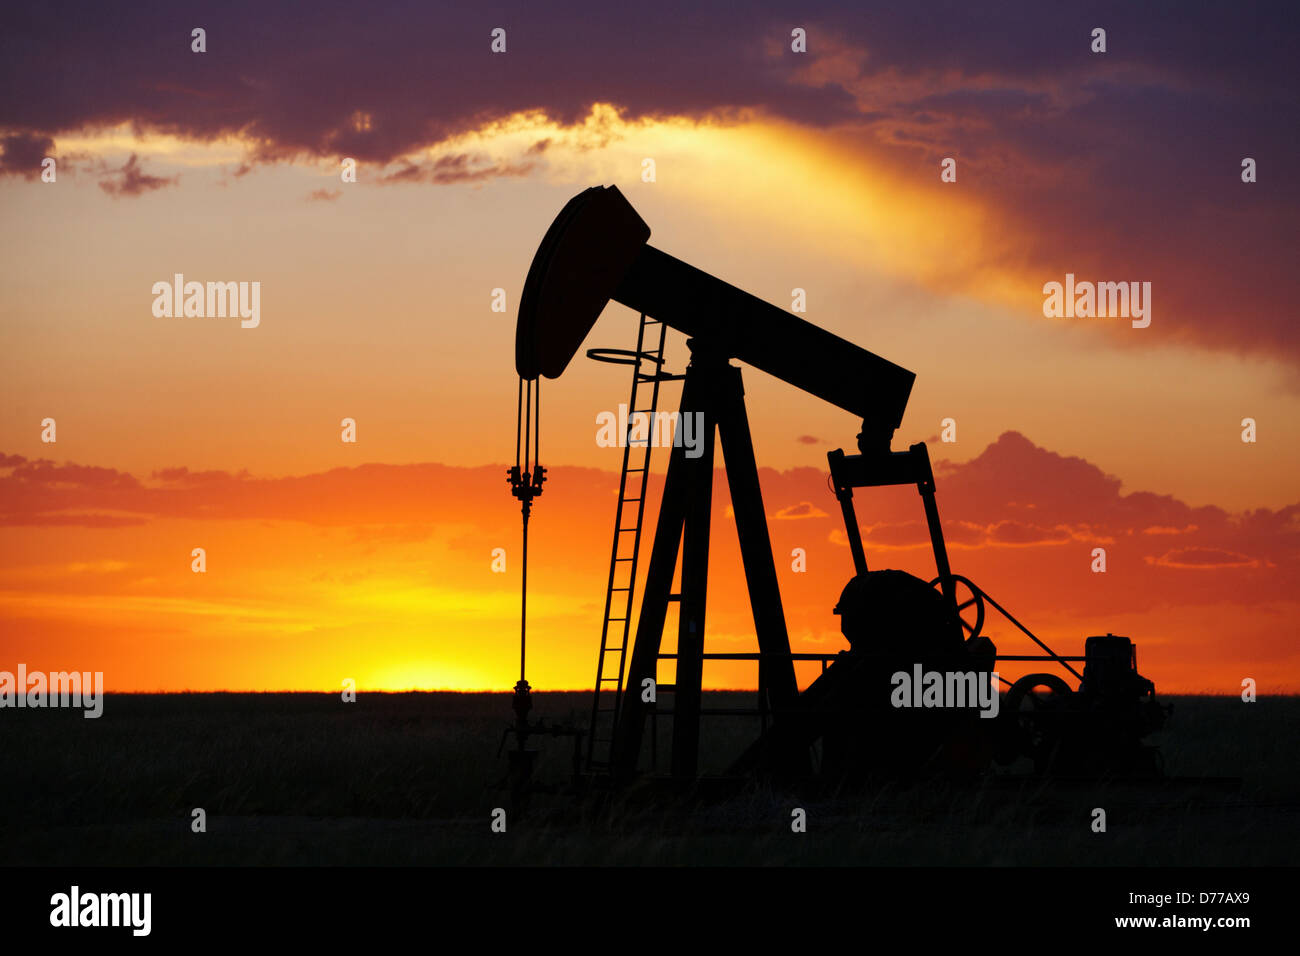 Oil Well Pump Jack at Sunset Stock Photo